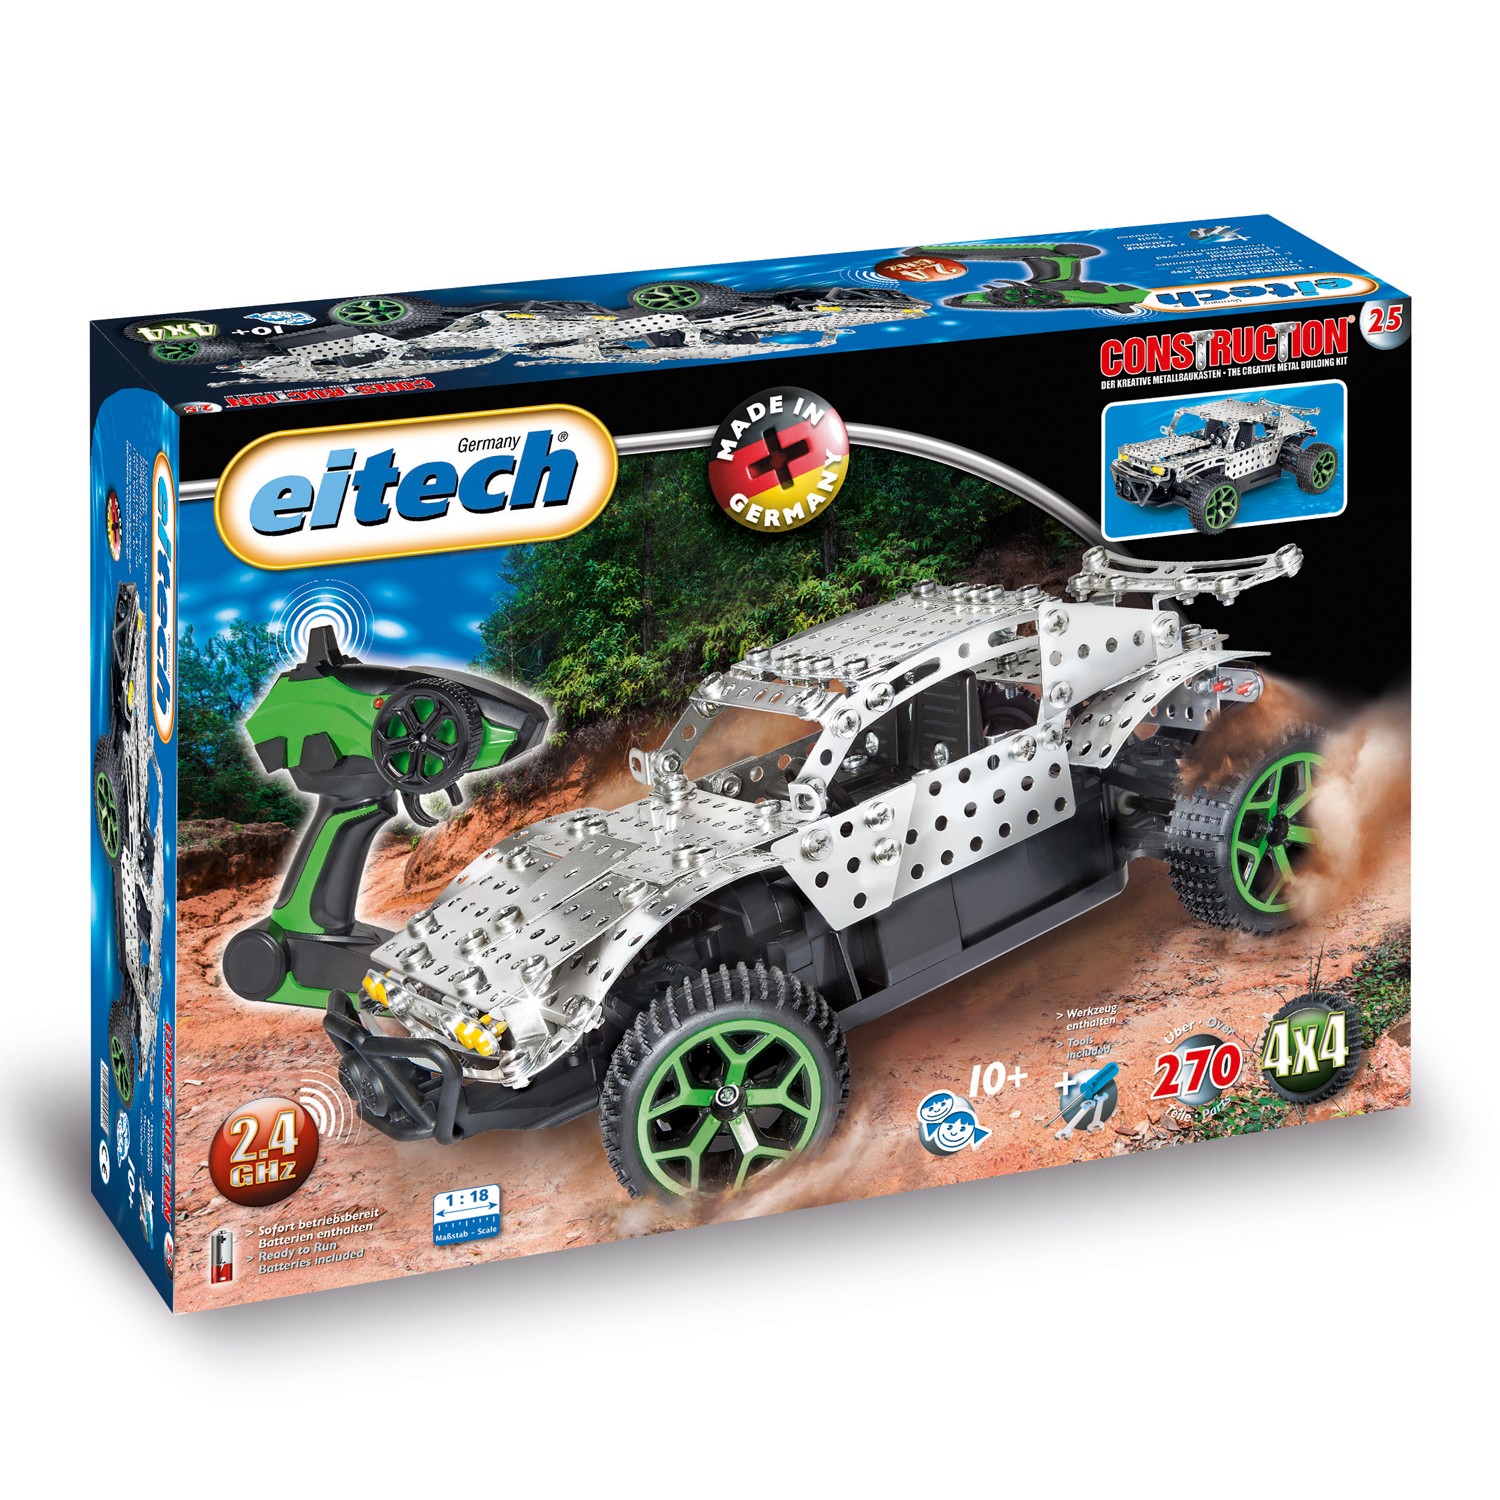 Eitech Metal Construction Kit 2.4 GHz RC Desert Truck with Remote Control Kit 